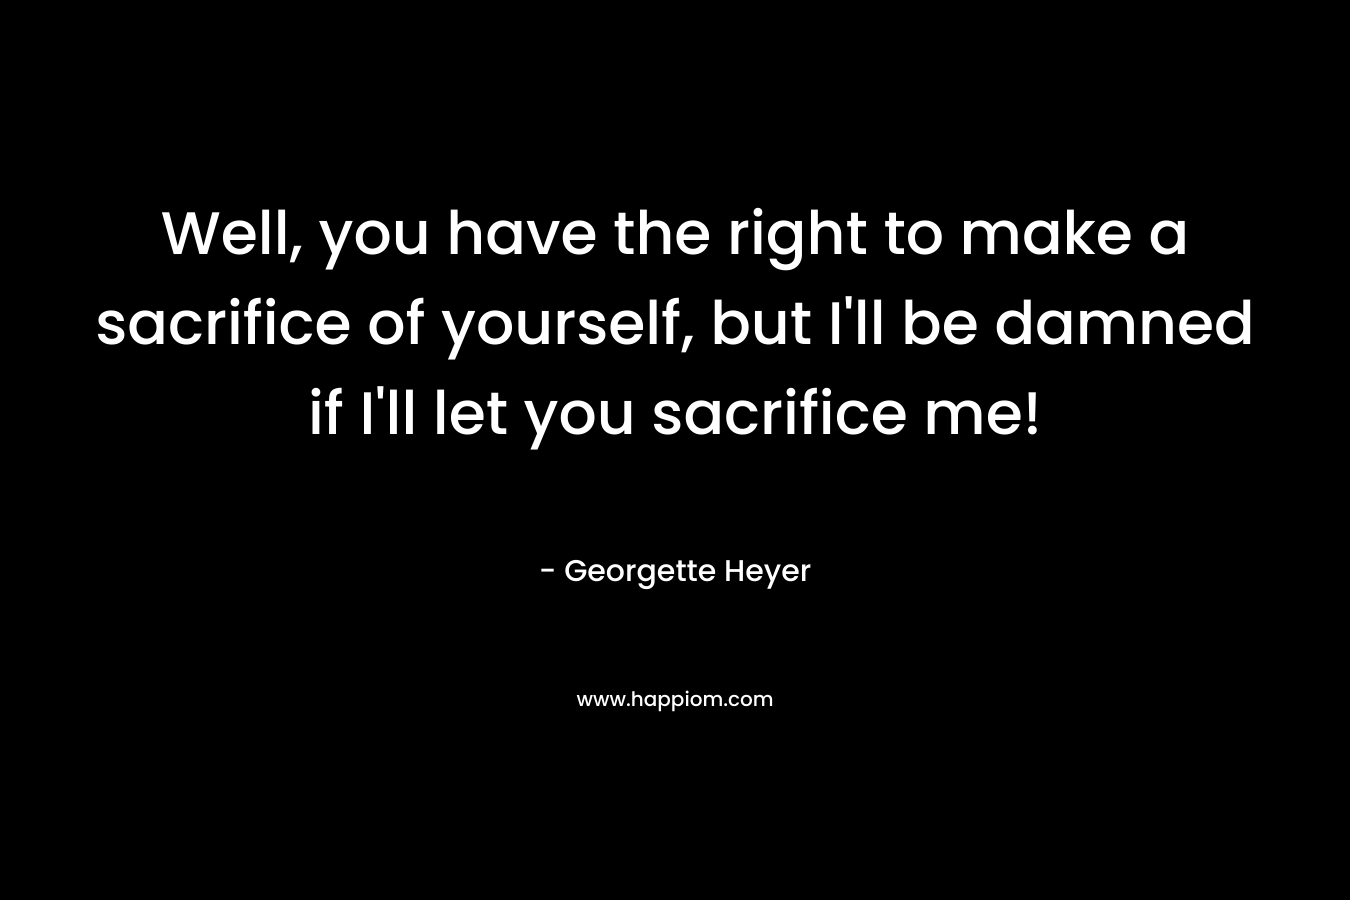 Well, you have the right to make a sacrifice of yourself, but I’ll be damned if I’ll let you sacrifice me! – Georgette Heyer